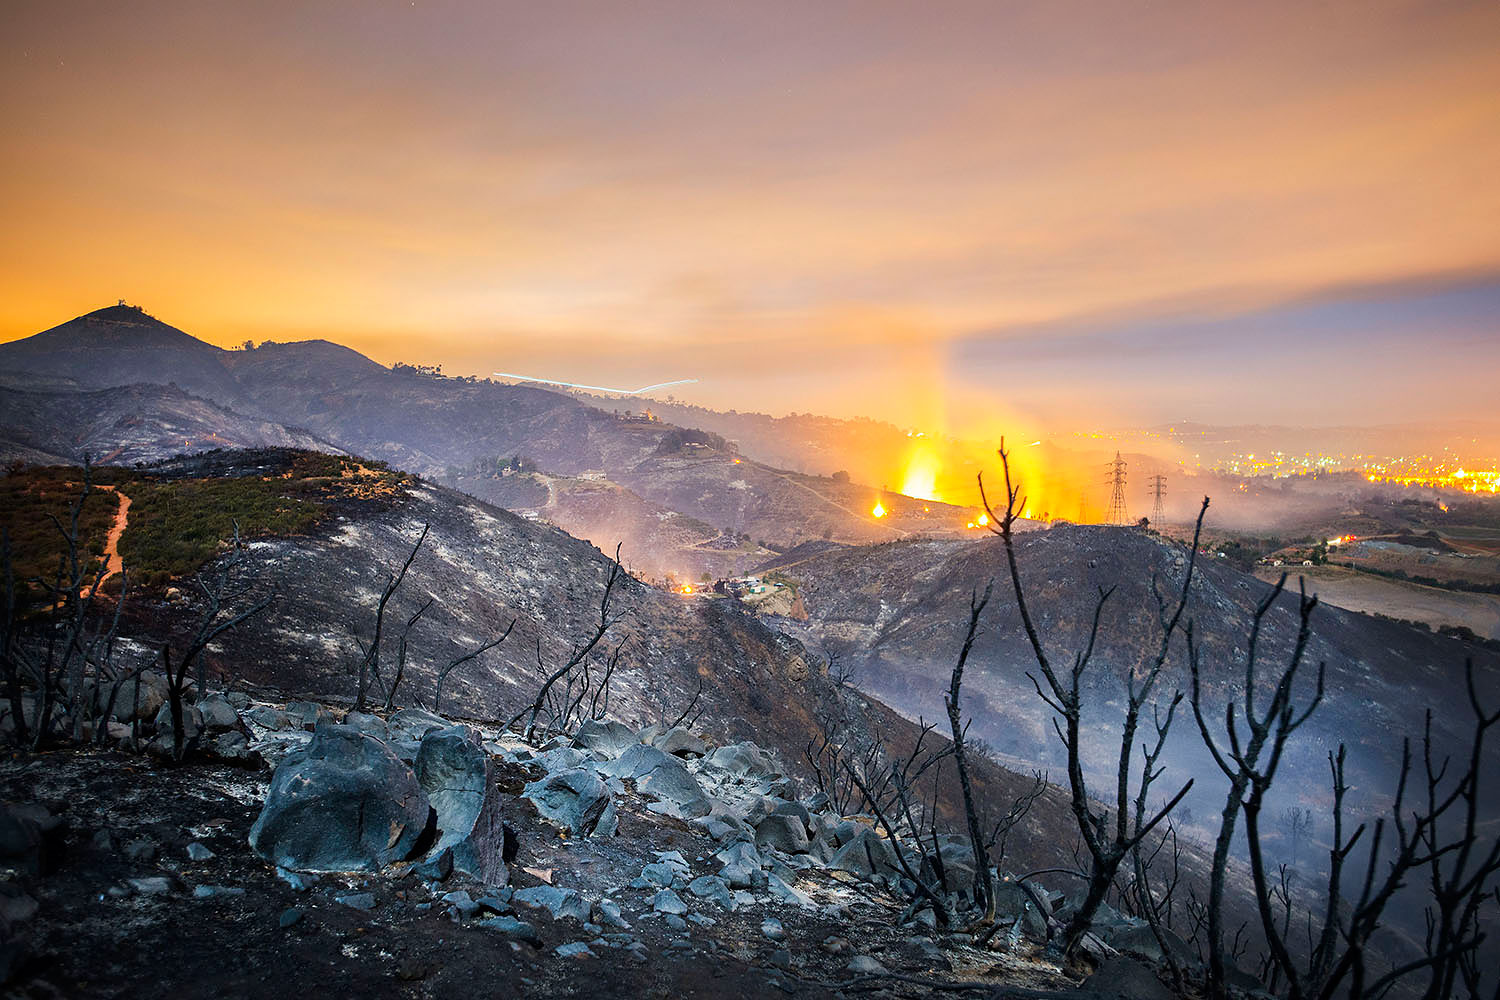 A longtime exposure shows smolderings remains of overnight fires on the hillsides of San Marcos, San Diego county, Calif., May 16, 2014.